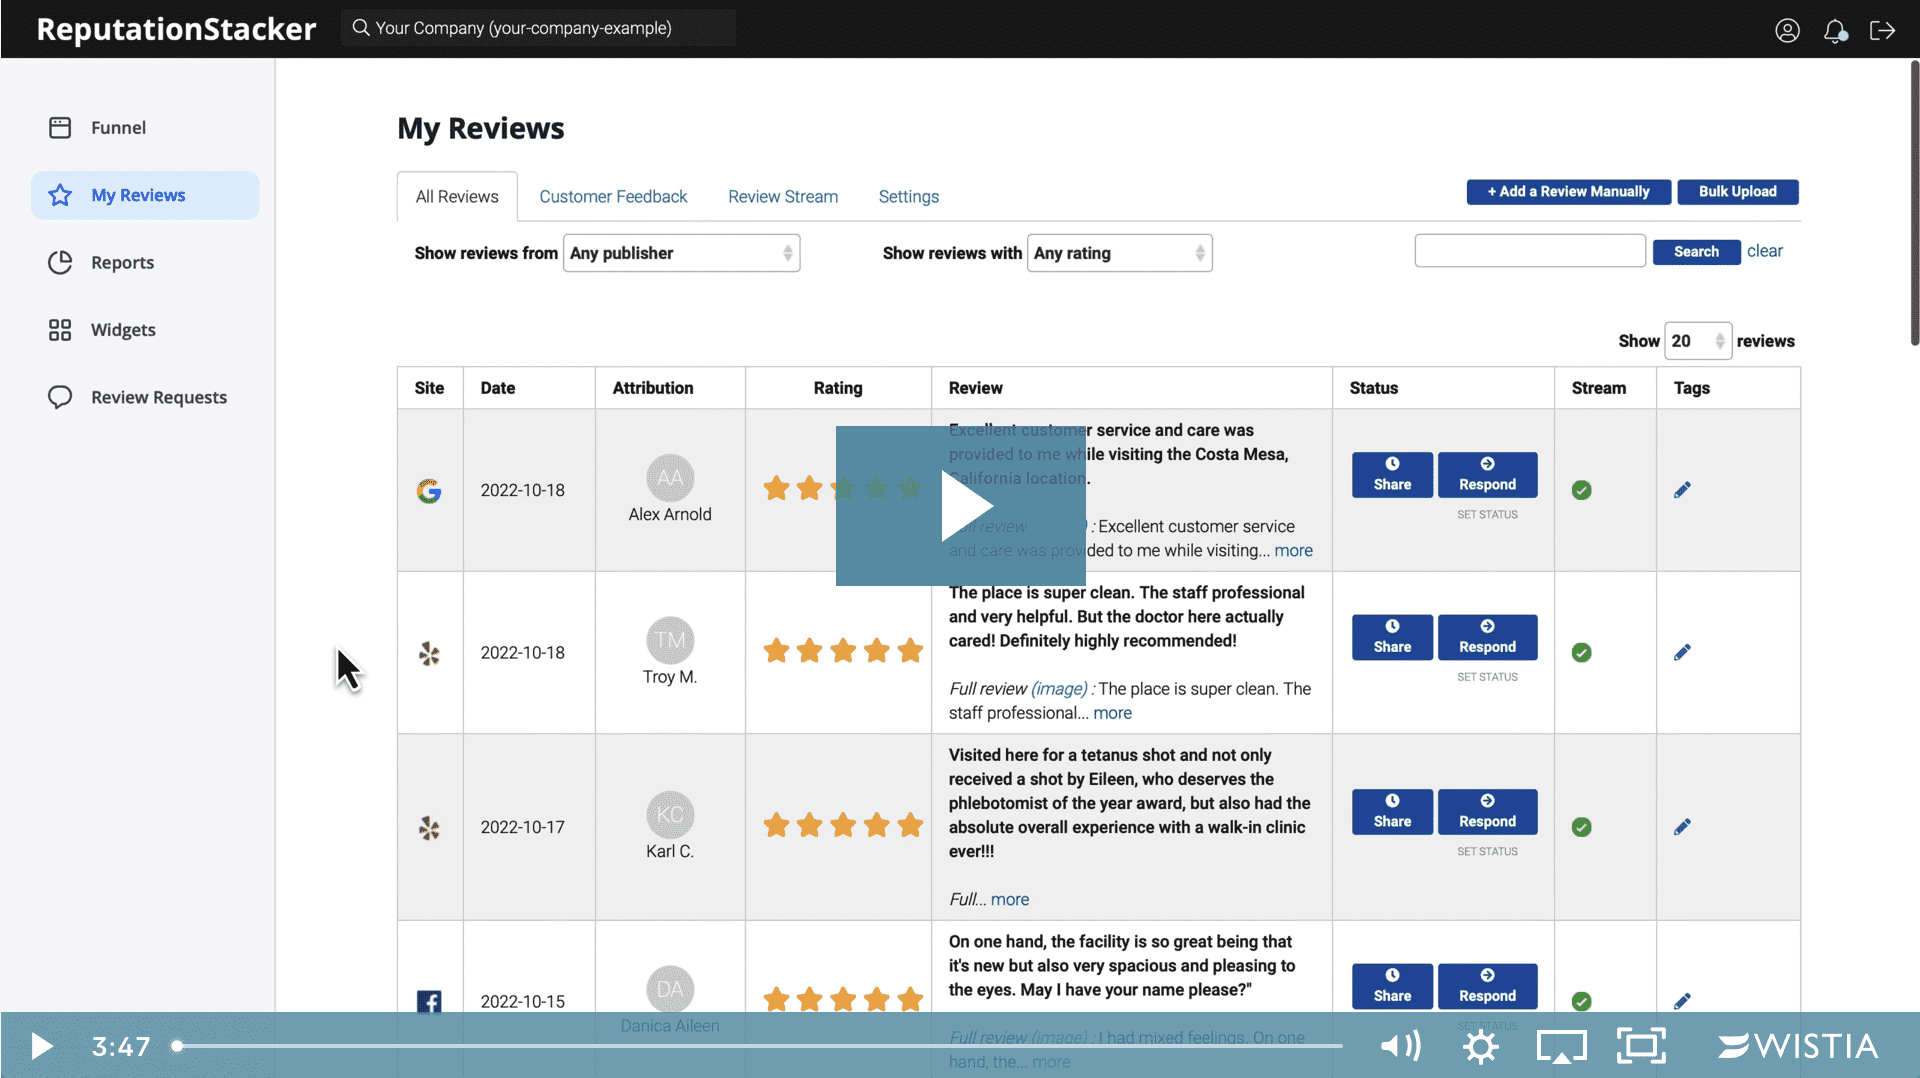 How To Get More Reviews with ReputationStacker - How It Works Video